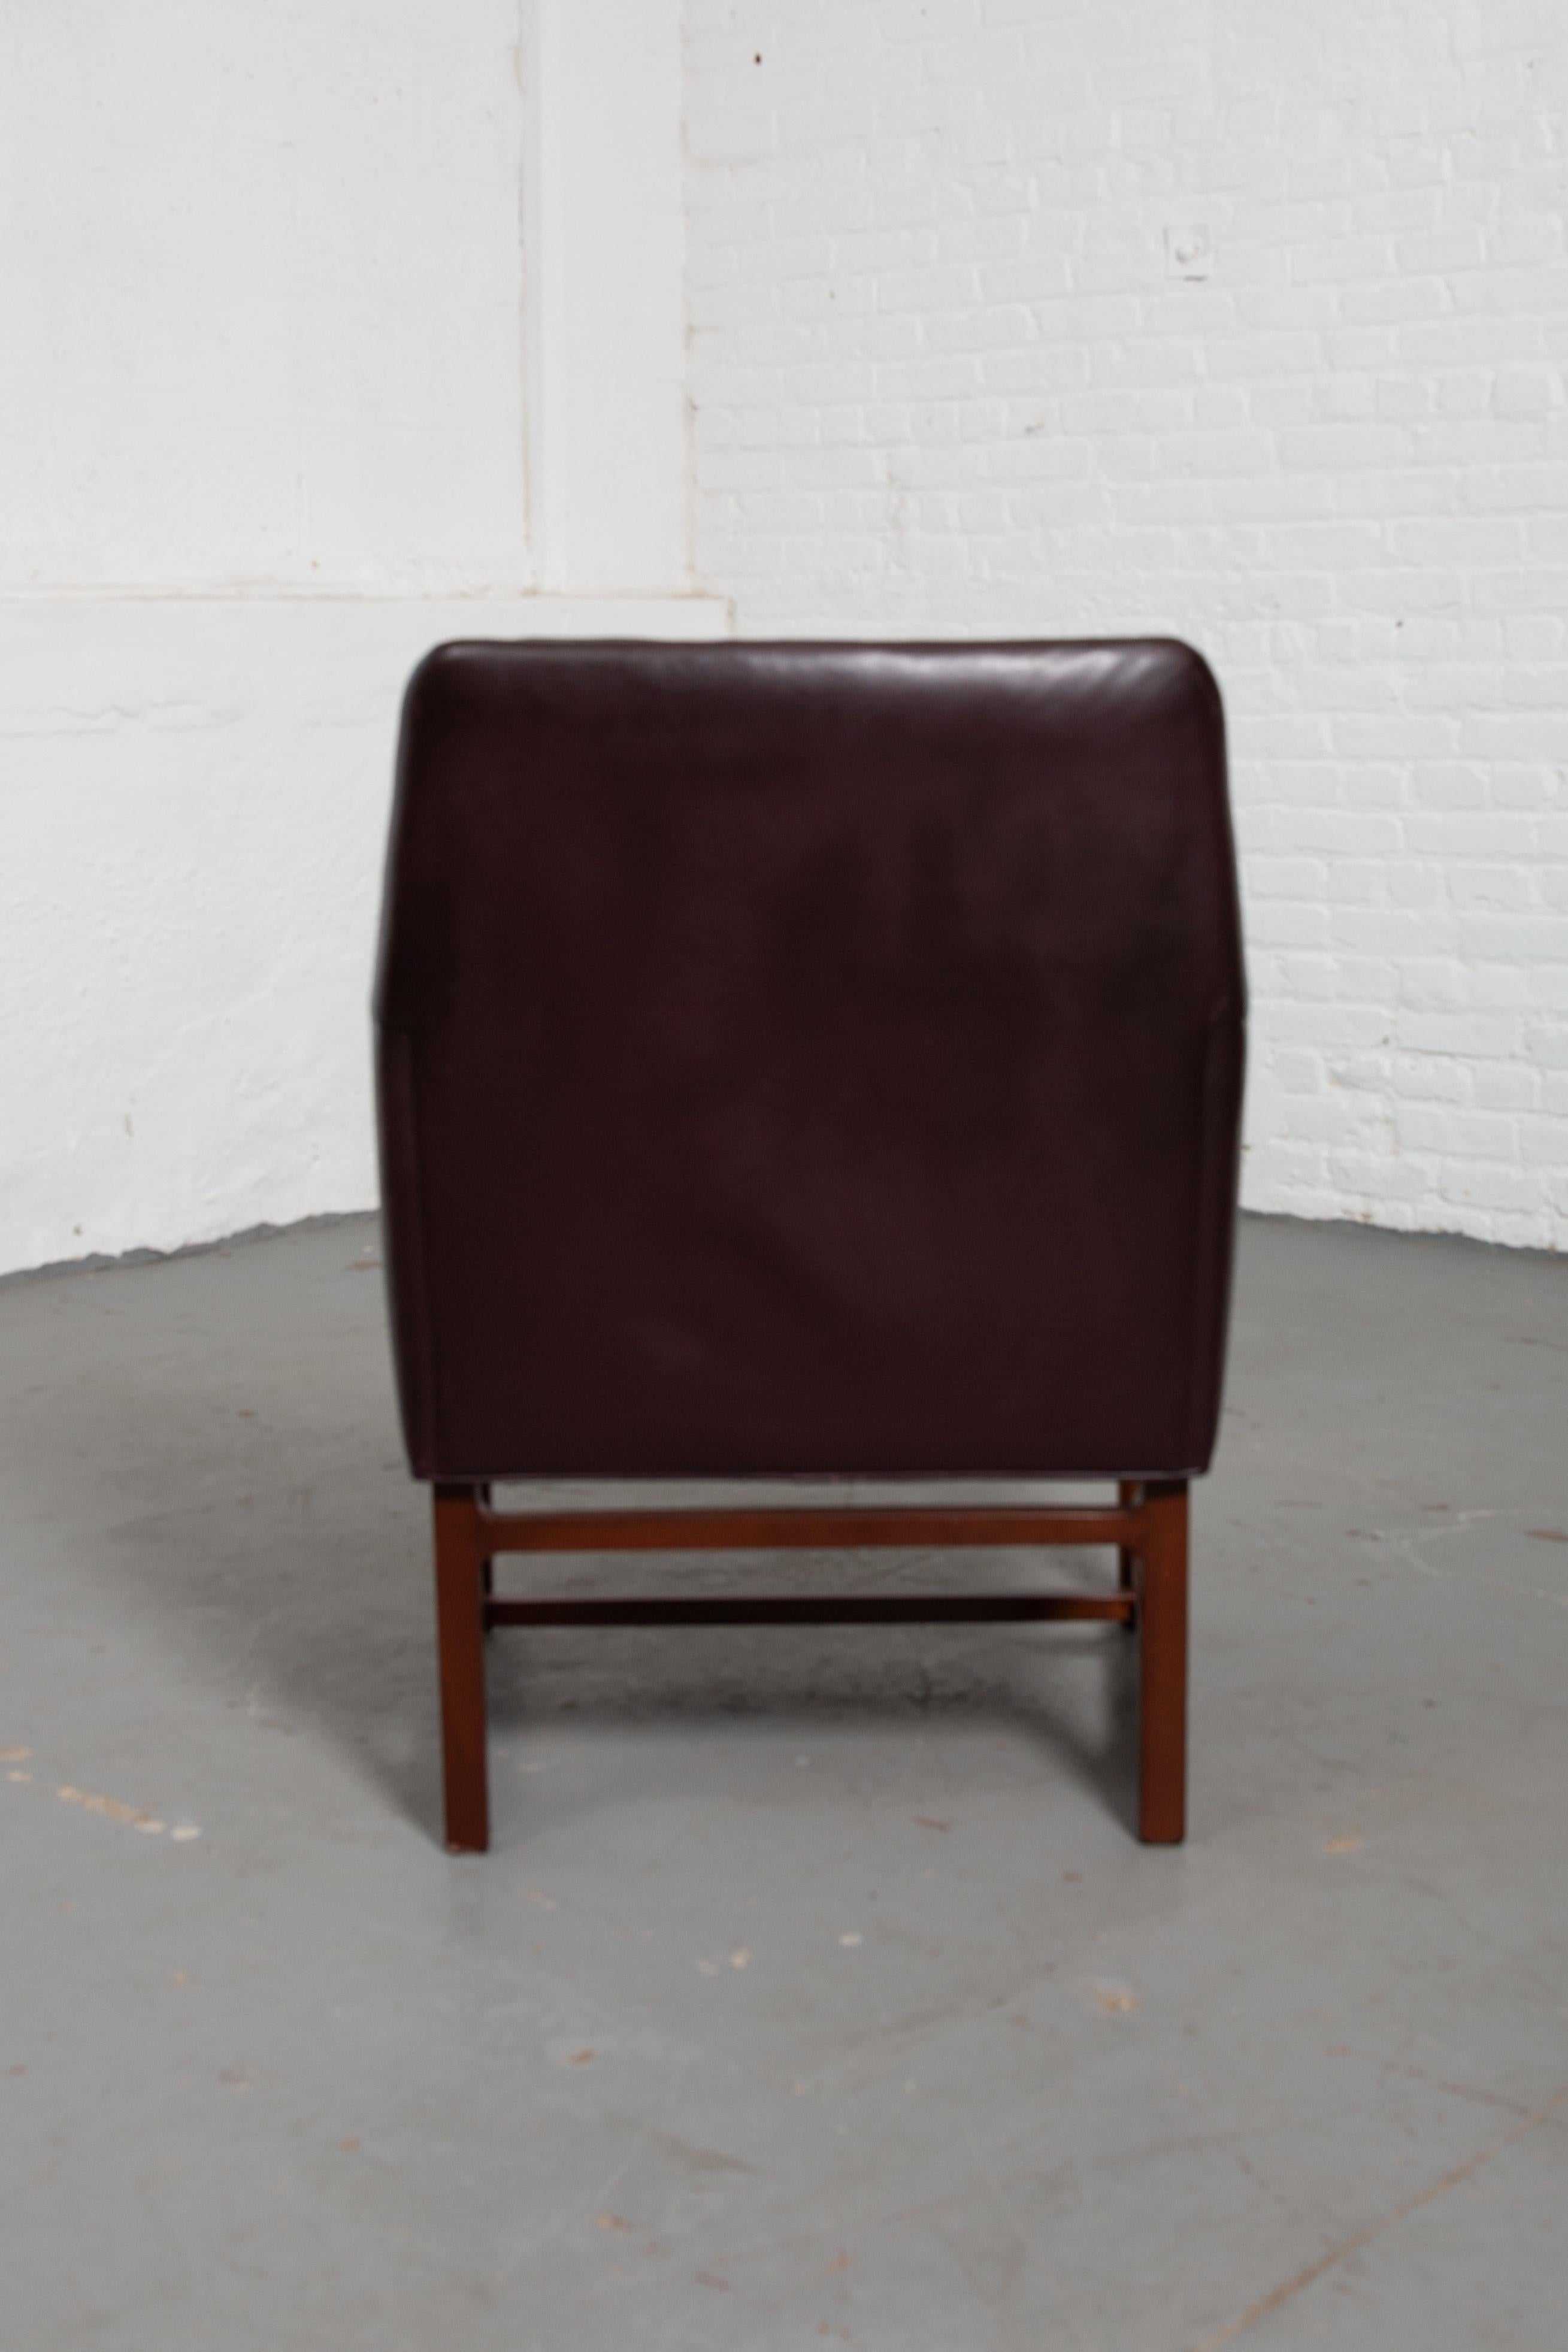 Midcentury Edward Wormley for Dunbar Armchairs with Original Leather 1